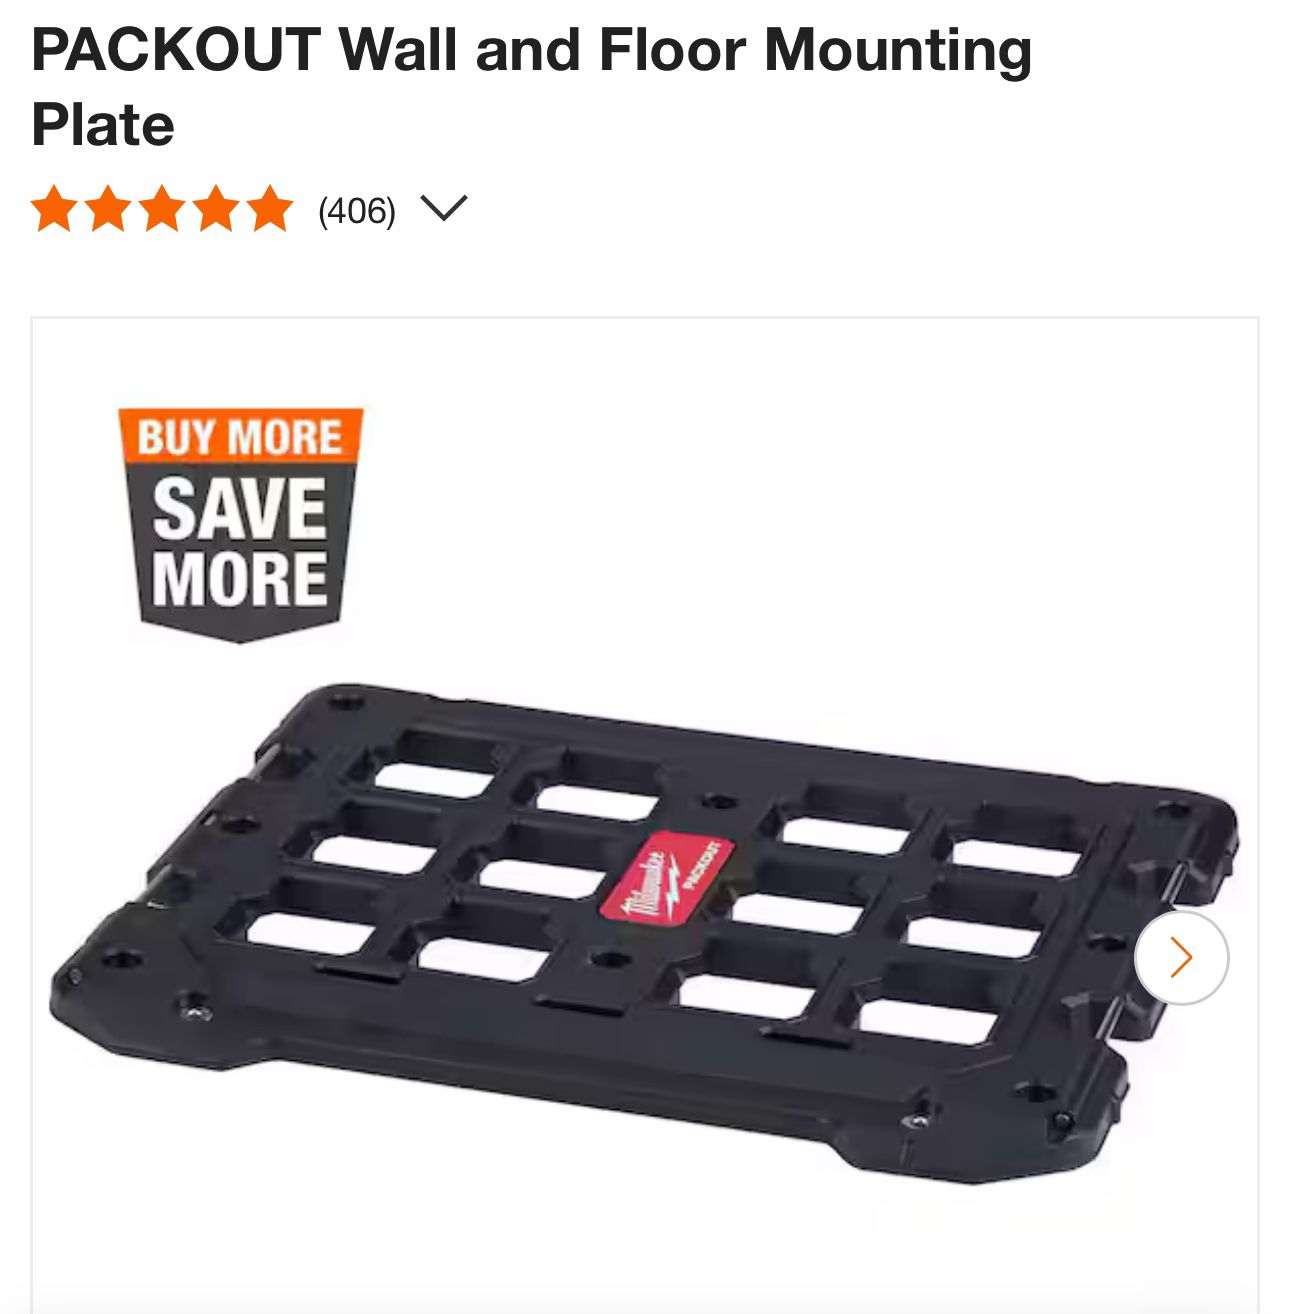 PACKOUT Wall and Floor Mounting Plate